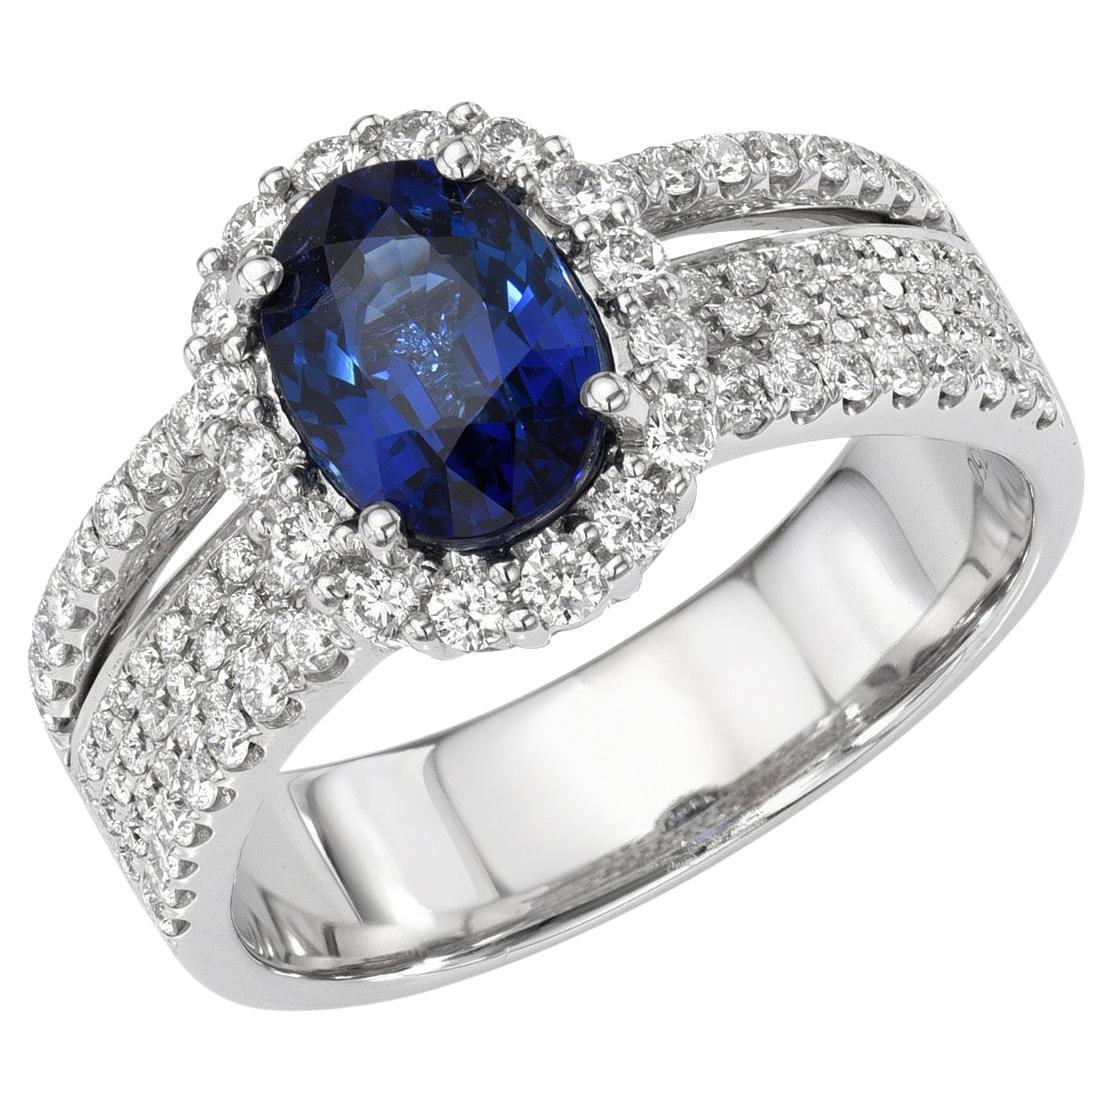 Blue Sapphire Ring 1.48 Carat Oval For Sale